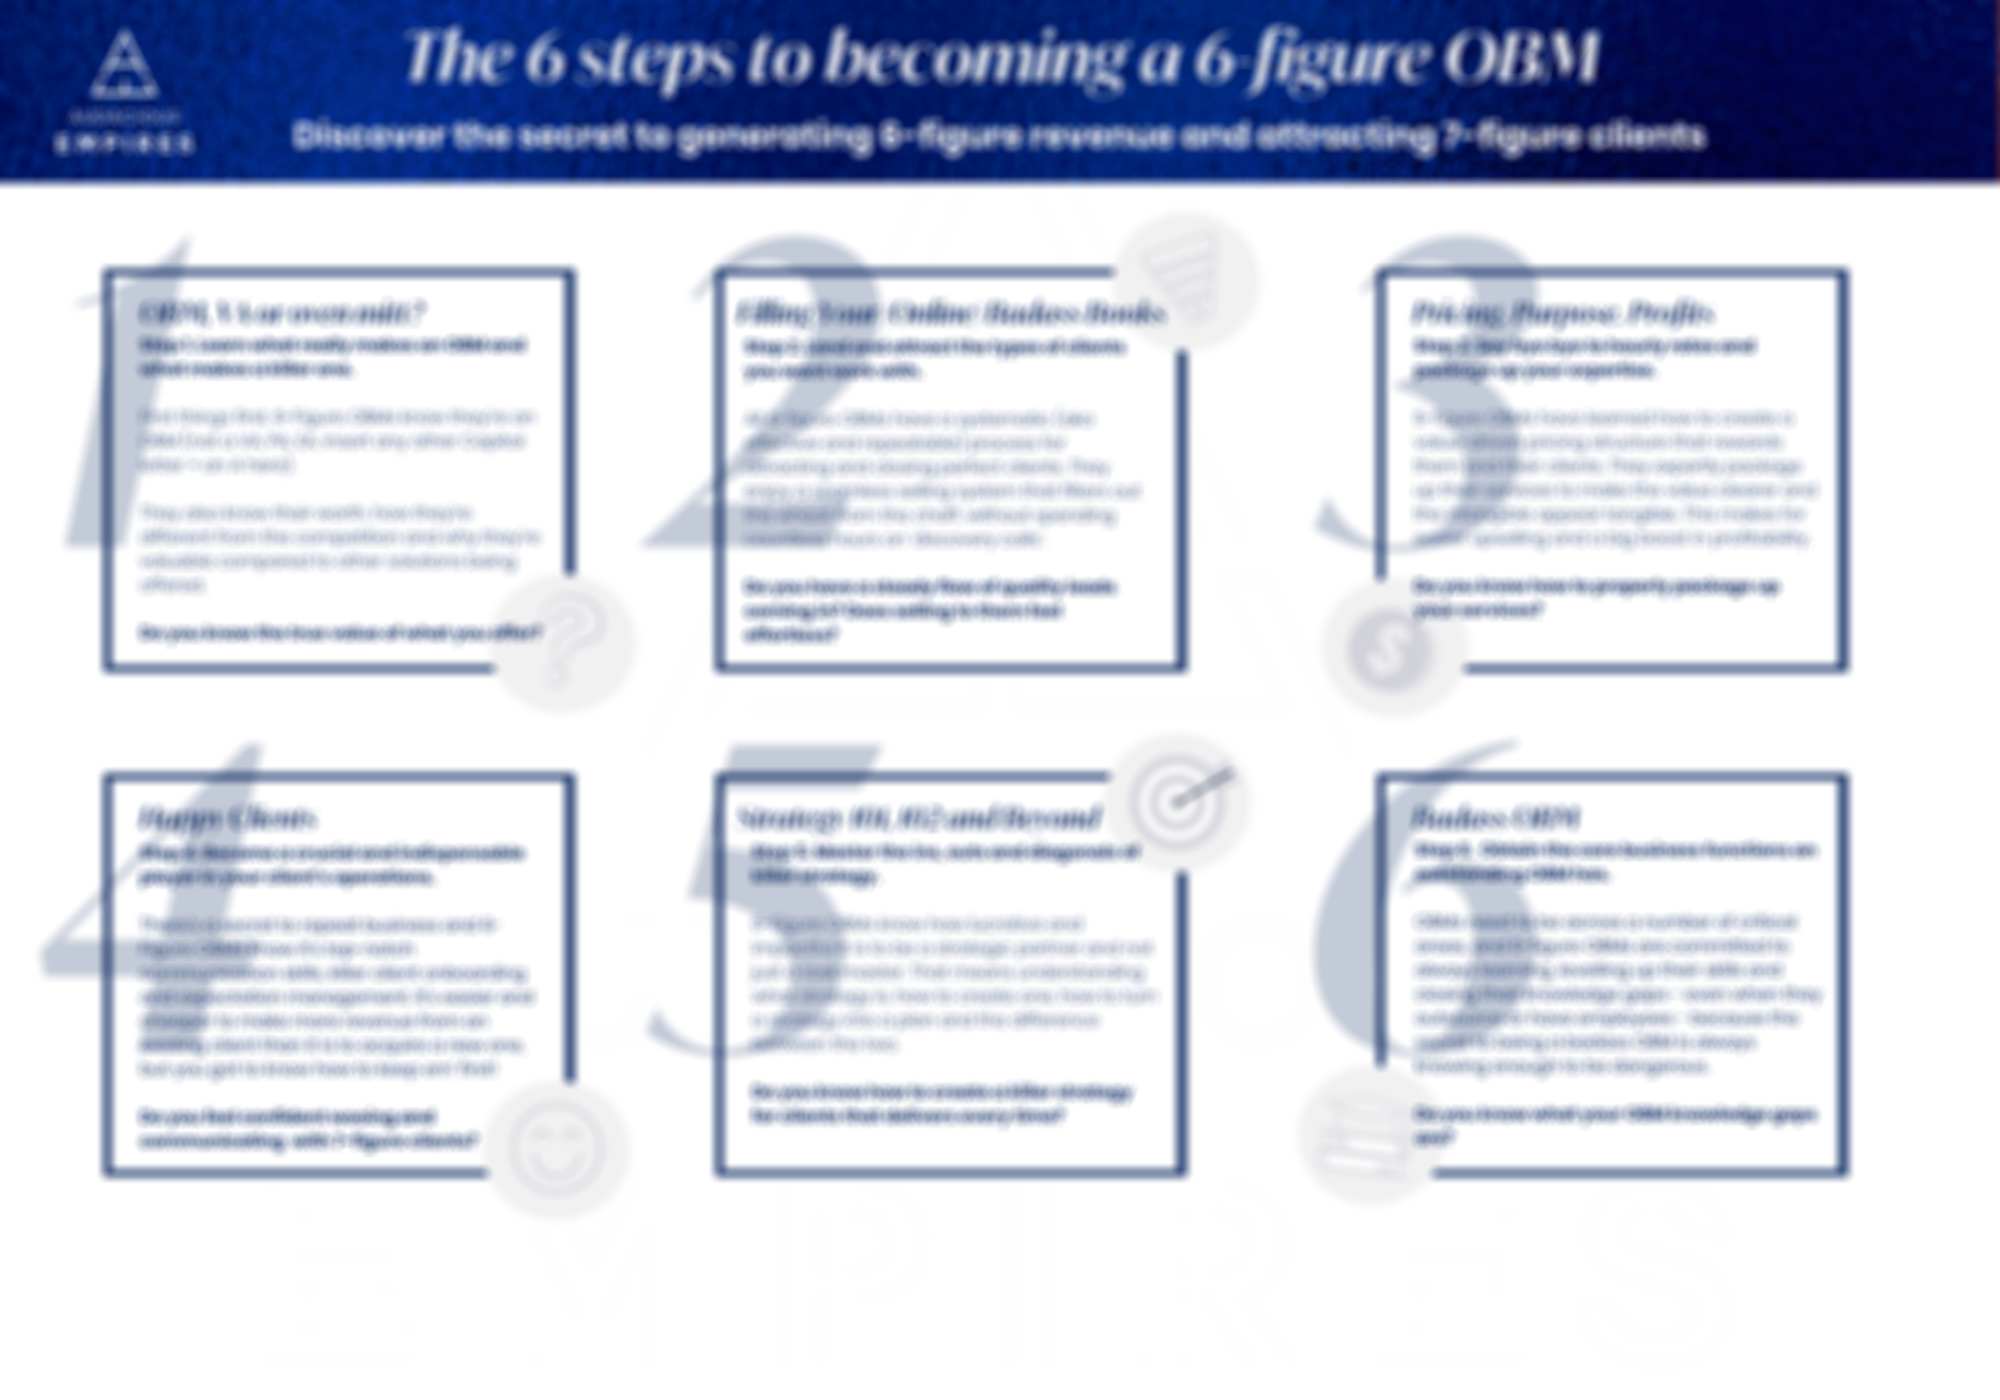 6 steps to becoming a 6-figure obm